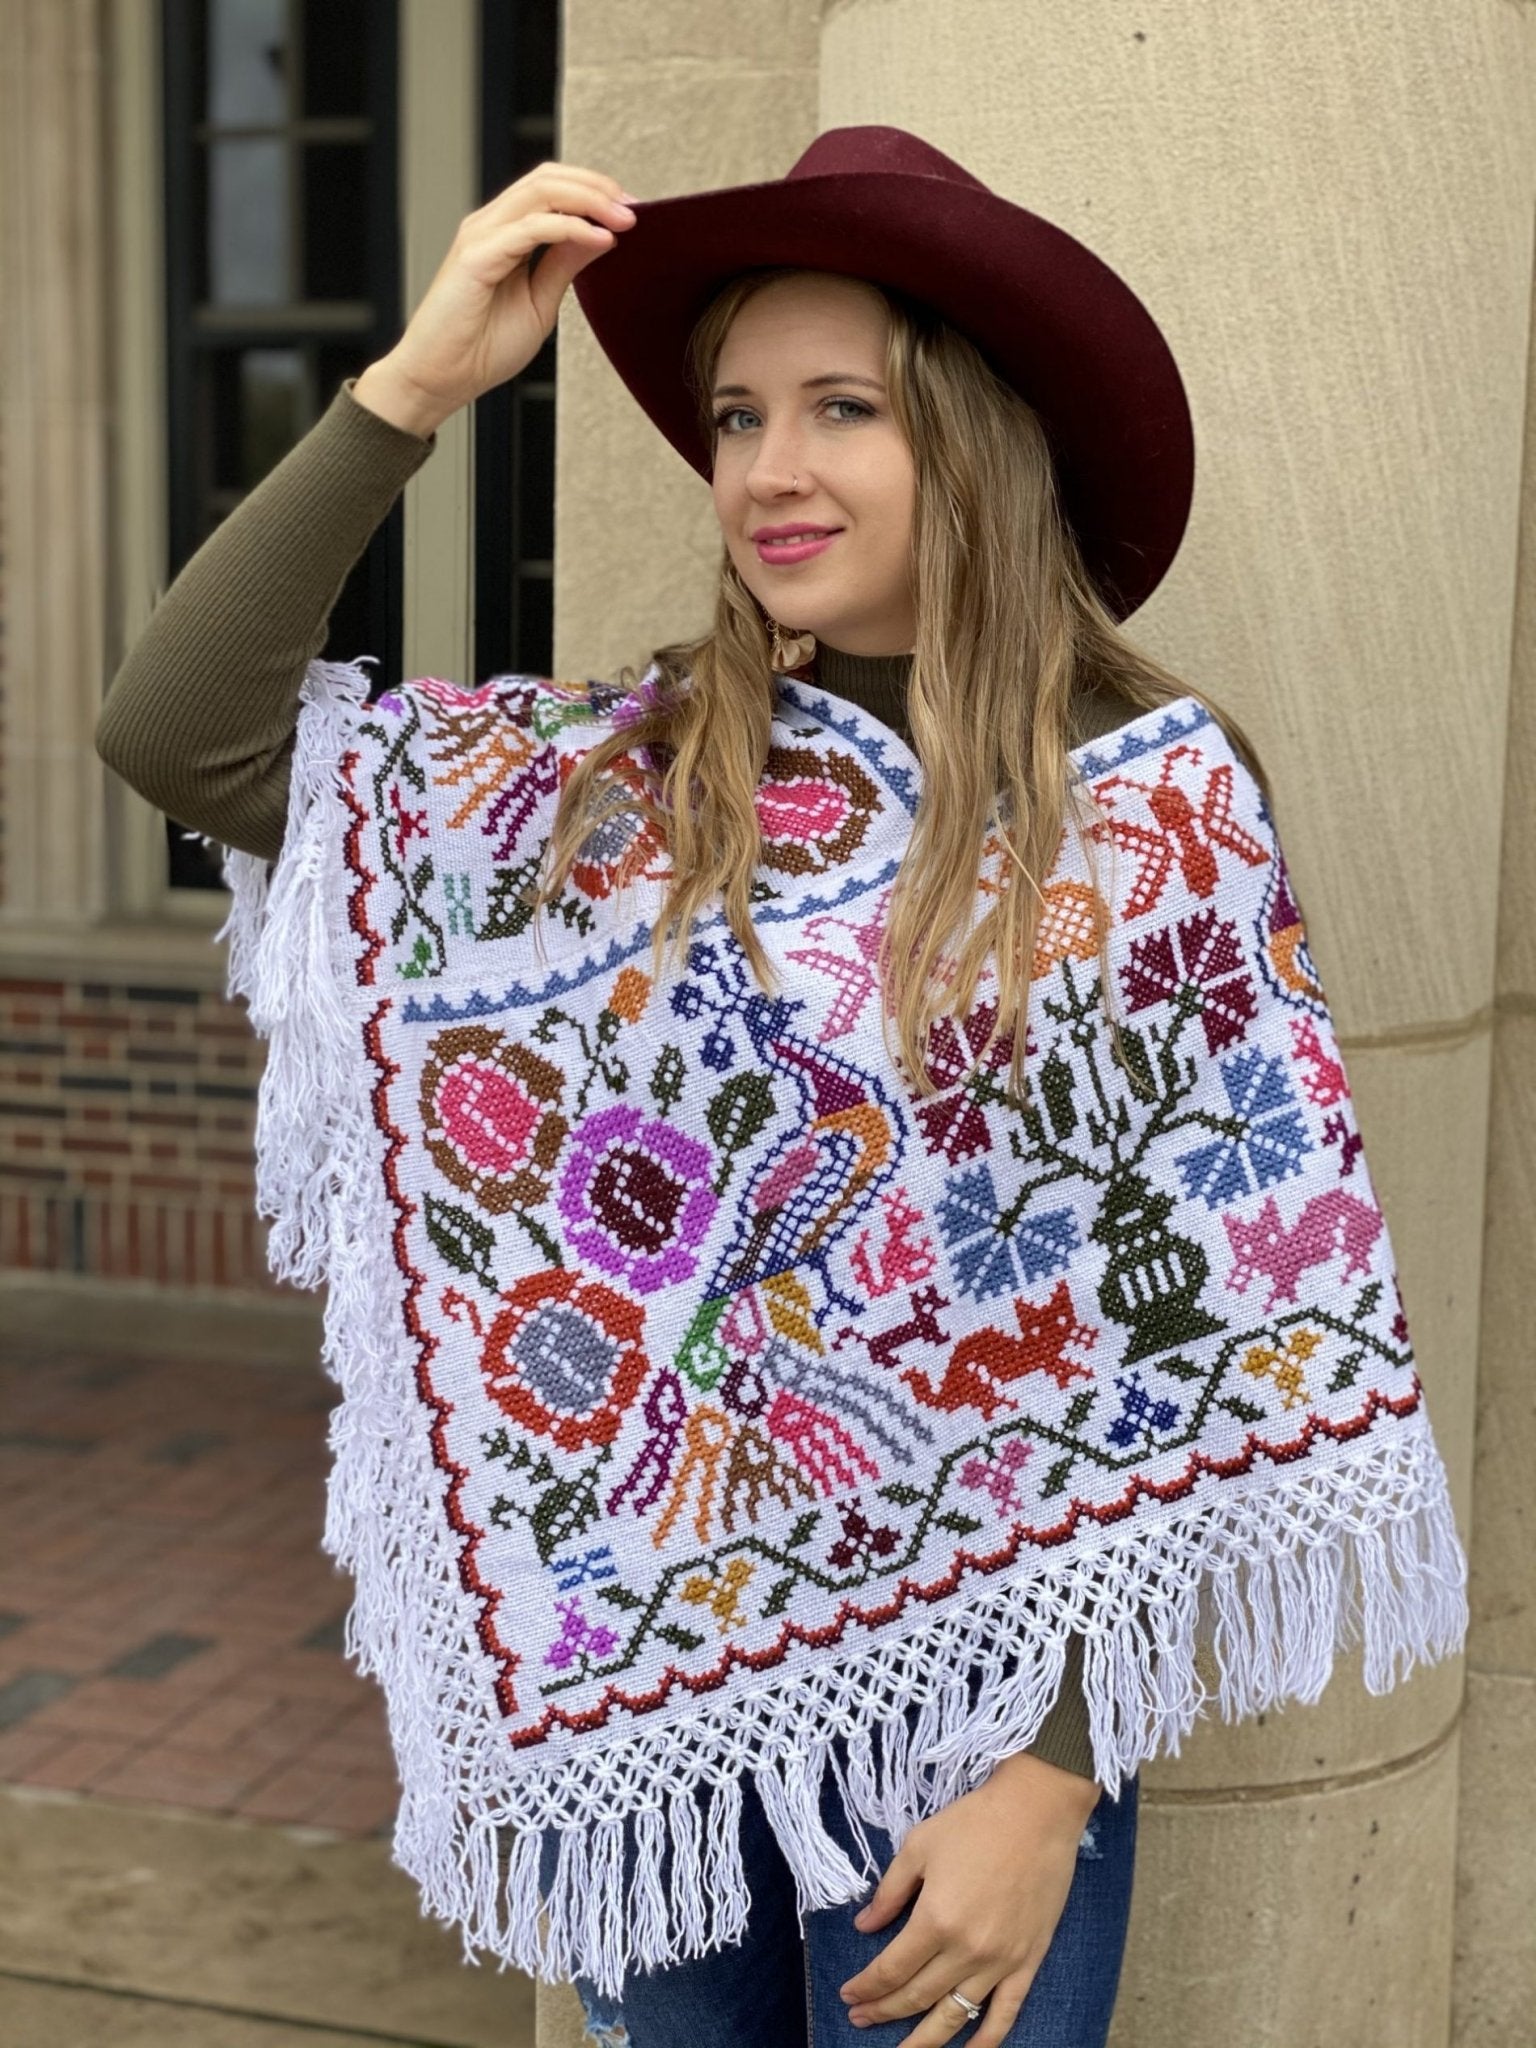 Mexican Hand Embroidered Poncho. Mañanita Pavos. - Solei Store